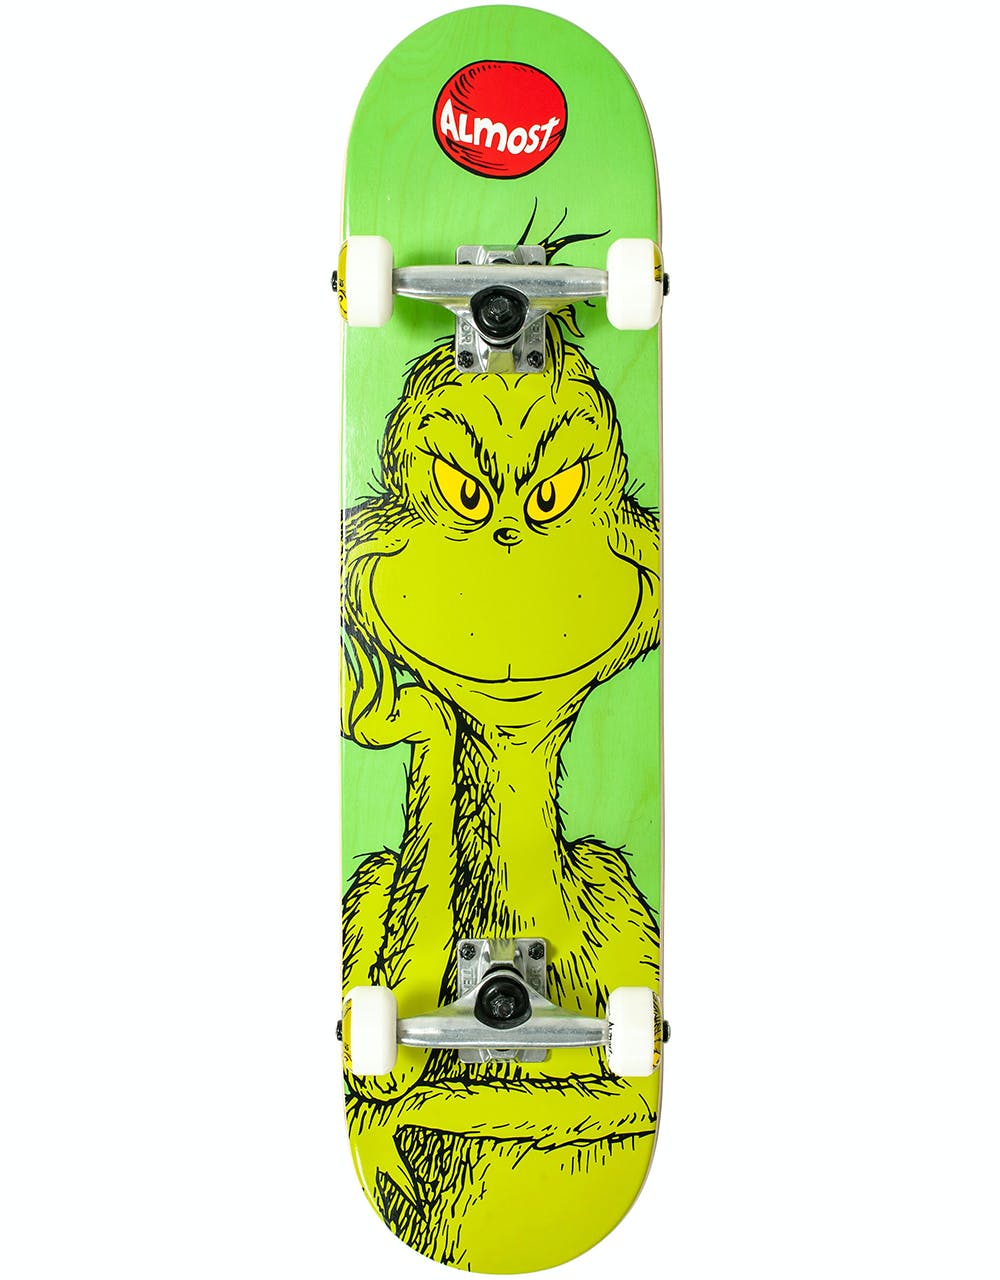 Almost x The Grinch Mid Complete Skateboard - 7.25"